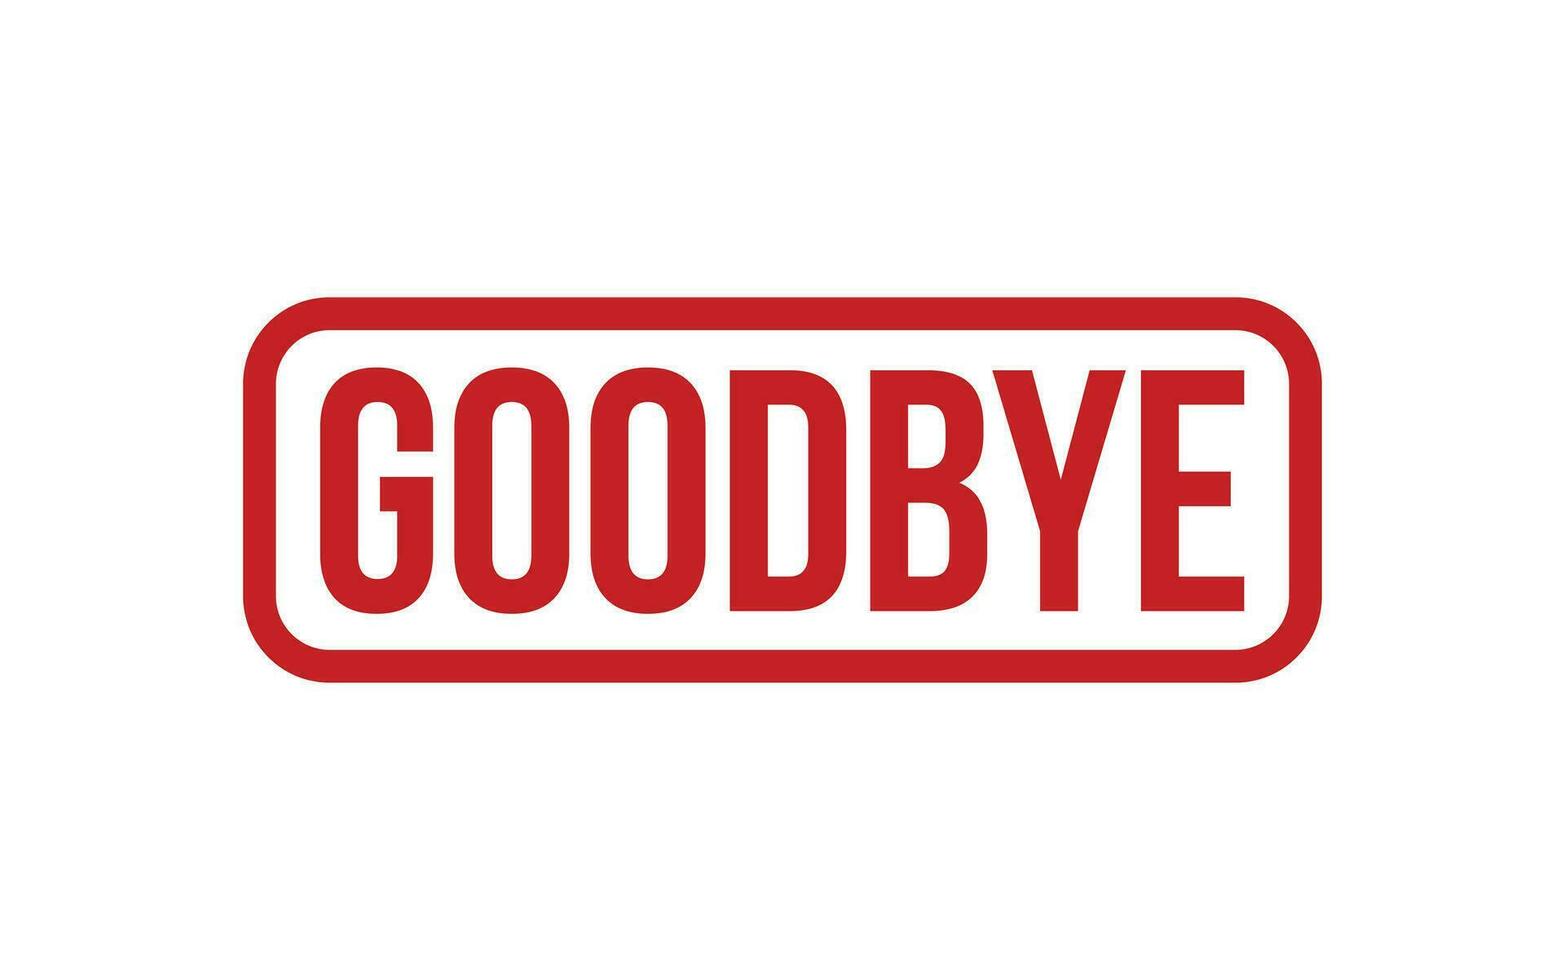 Goodbye Rubber Stamp Seal Vector